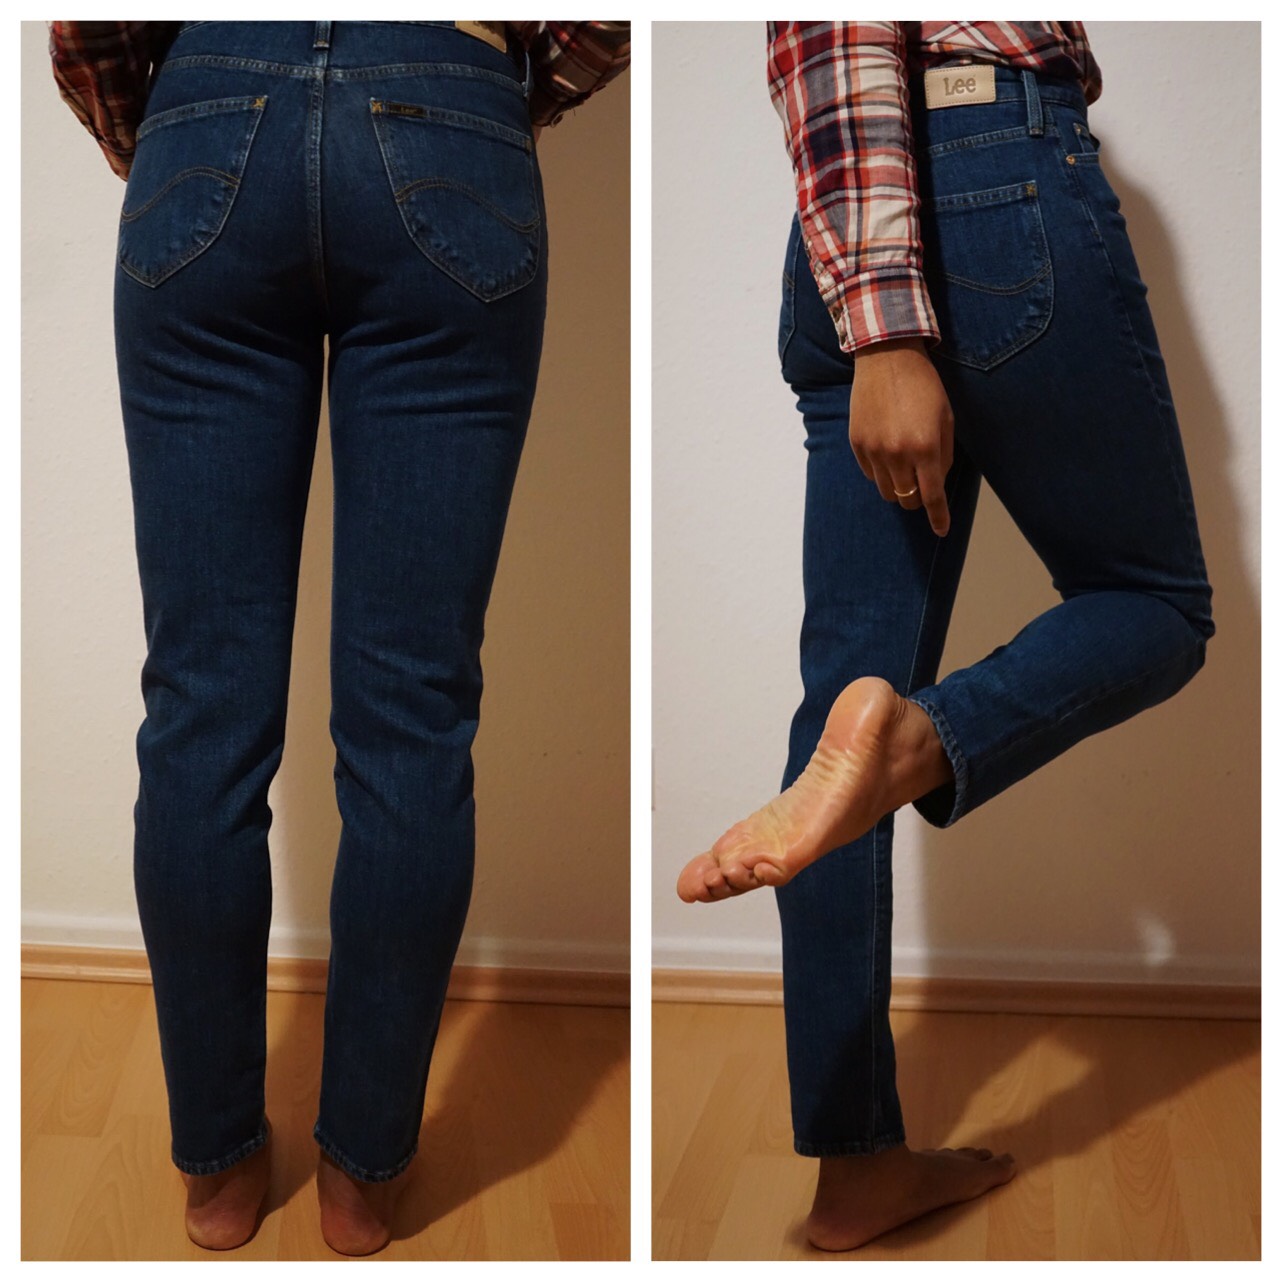 types of jeans for big thighs